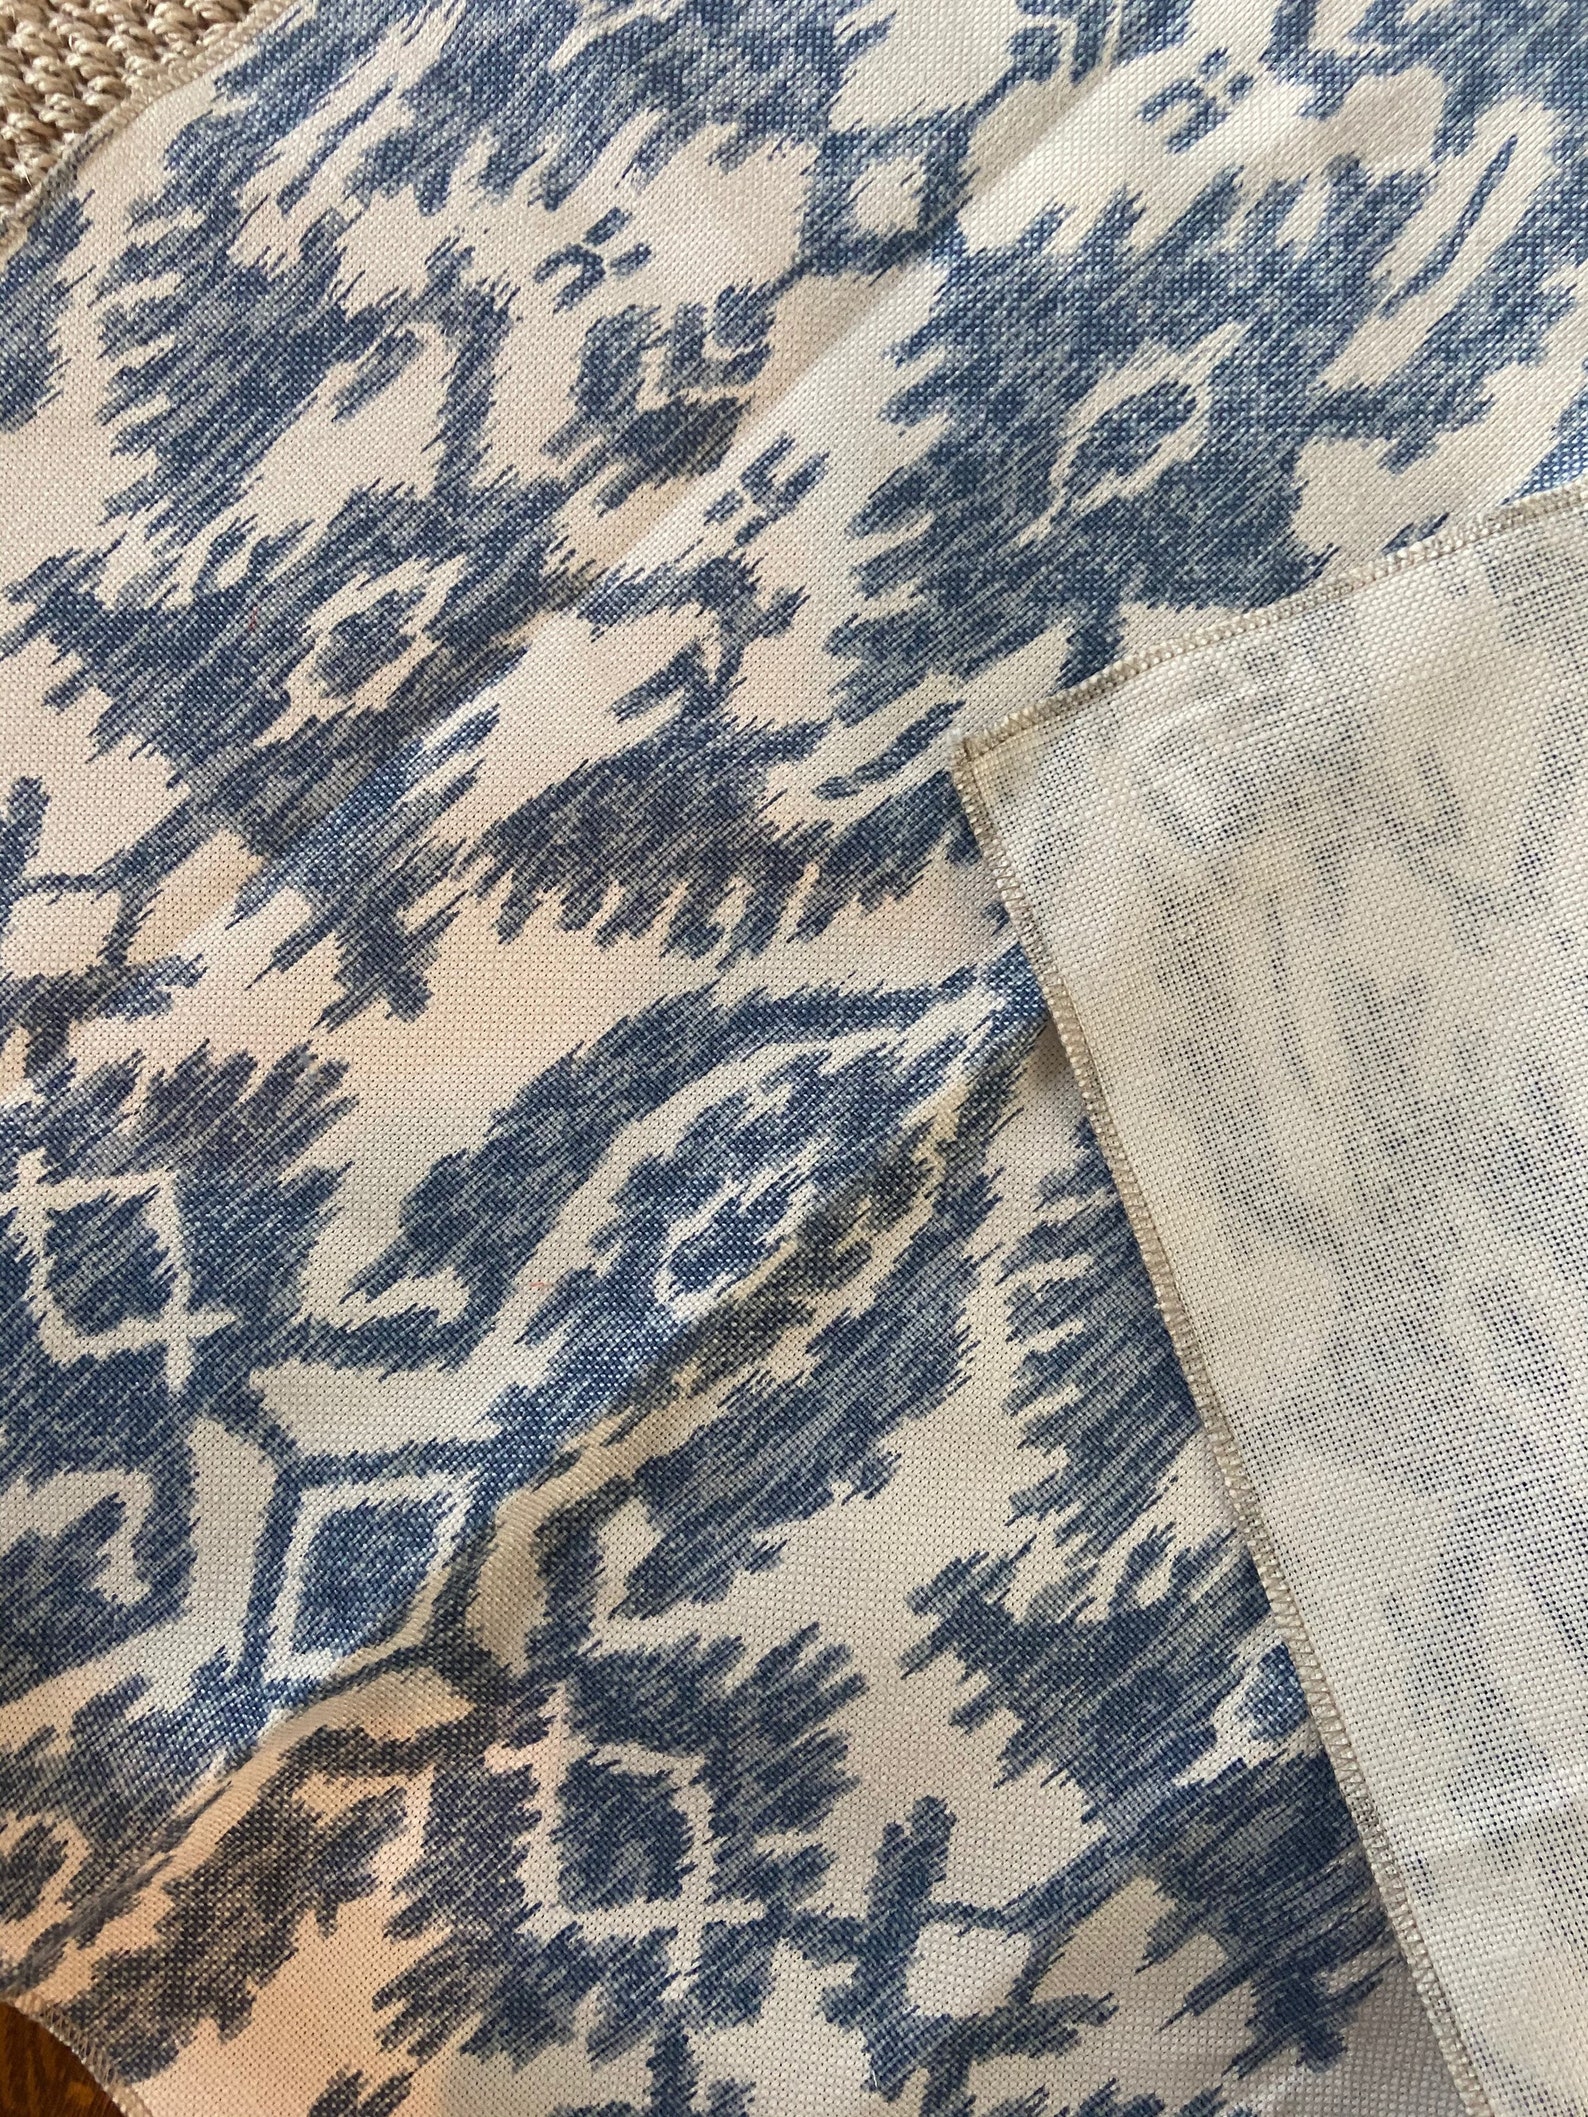 Thibaut Blue & White Ikat Fabric Sample Remnant High-end - Etsy